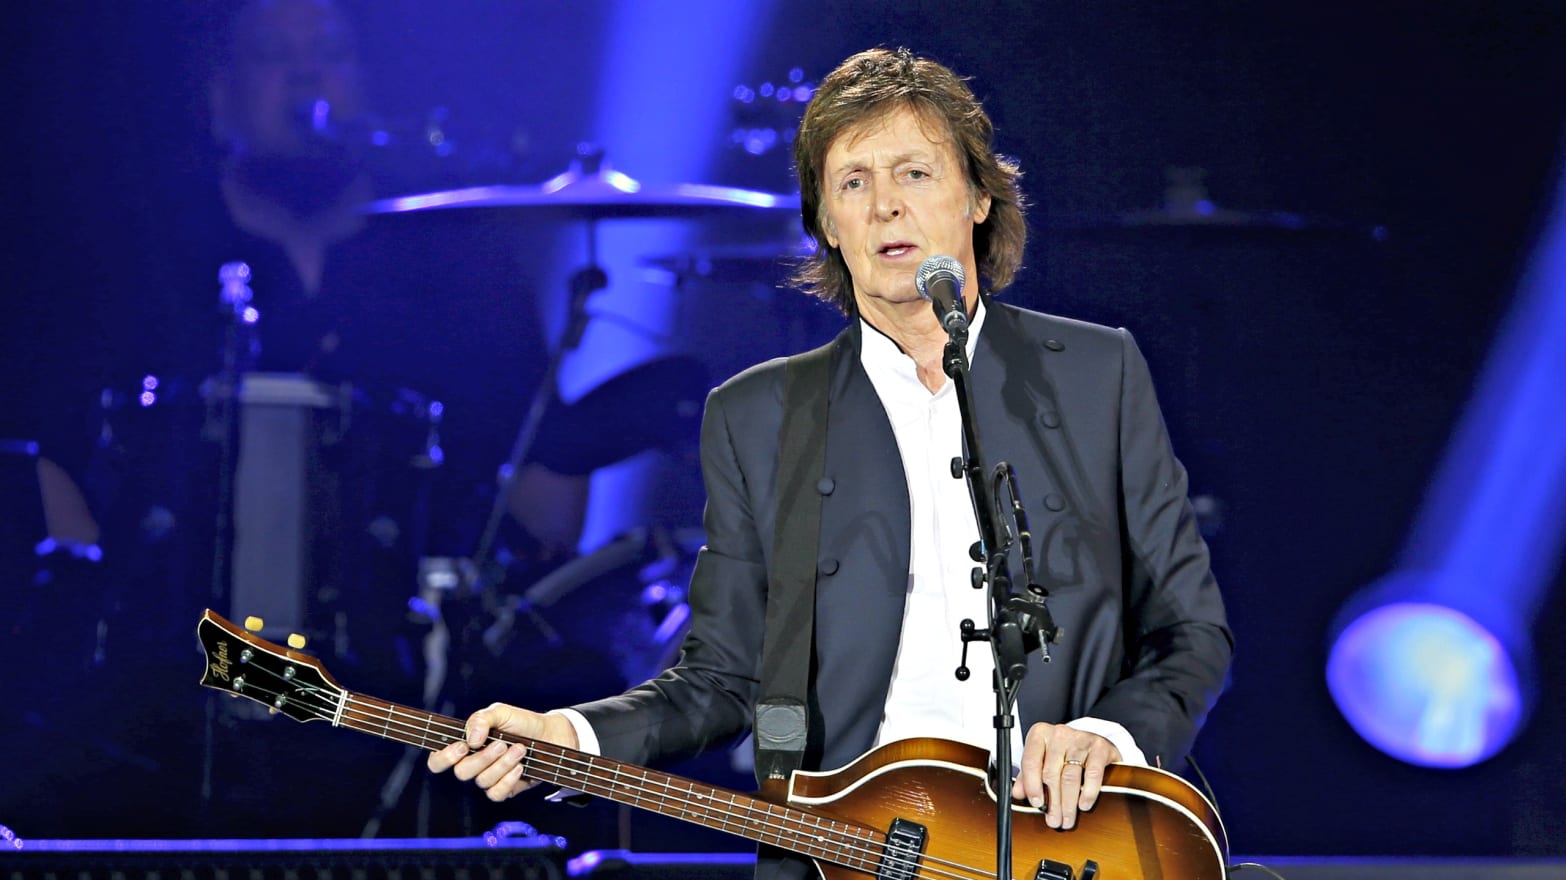 Watch Paul McCartney Play ‘A Hard Day’s Night’ for First Time in 51 Years